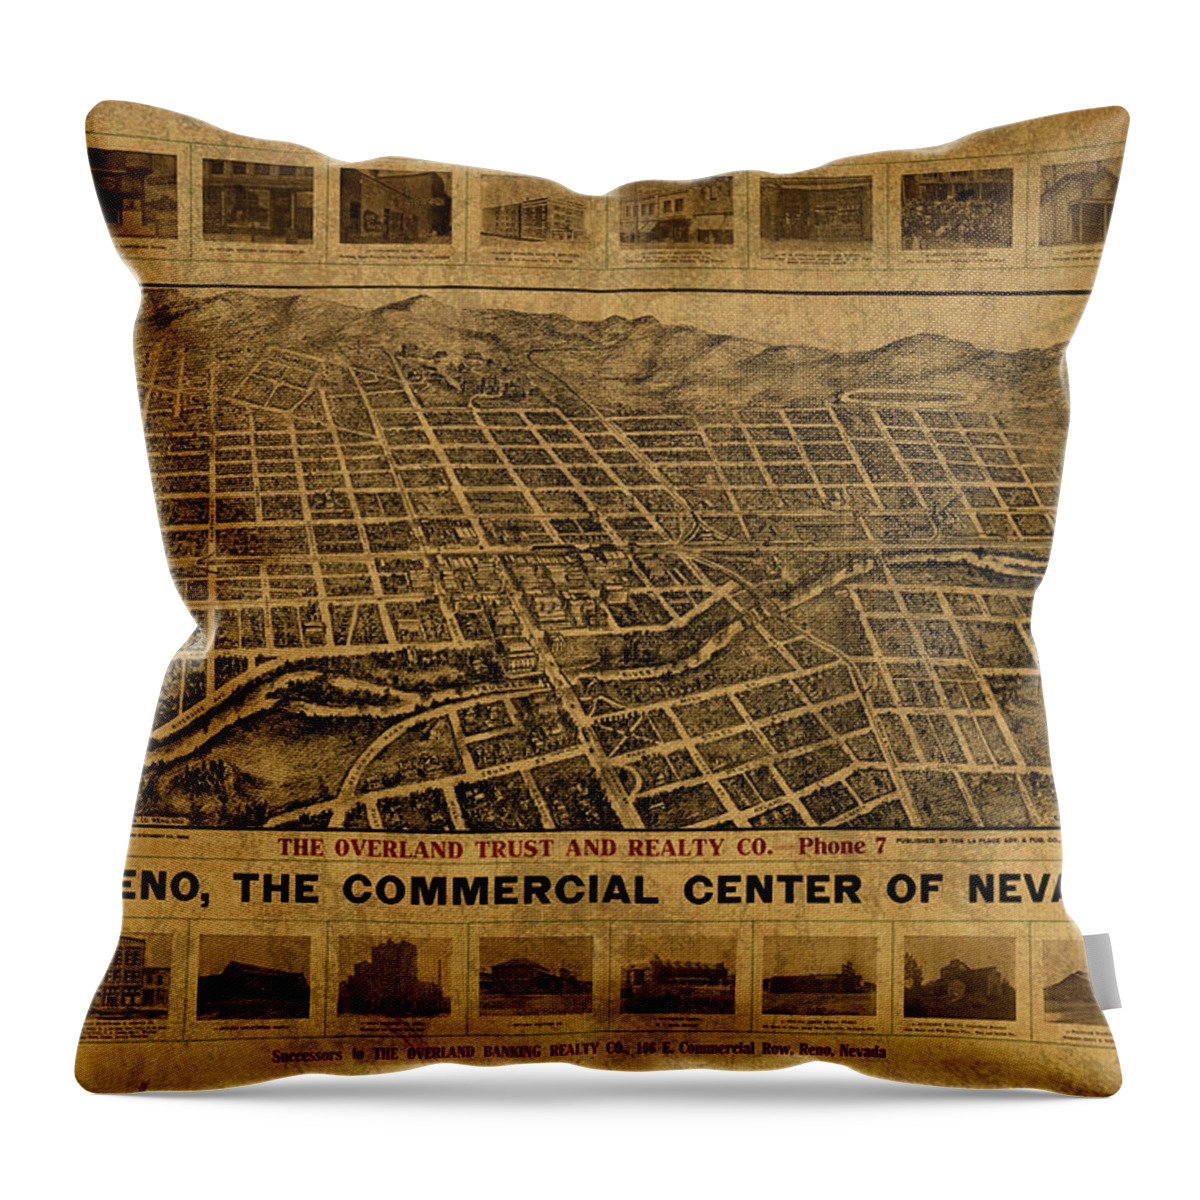 Reno Throw Pillow featuring the mixed media Reno Nevada Vintage City Street Map 1907 by Design Turnpike